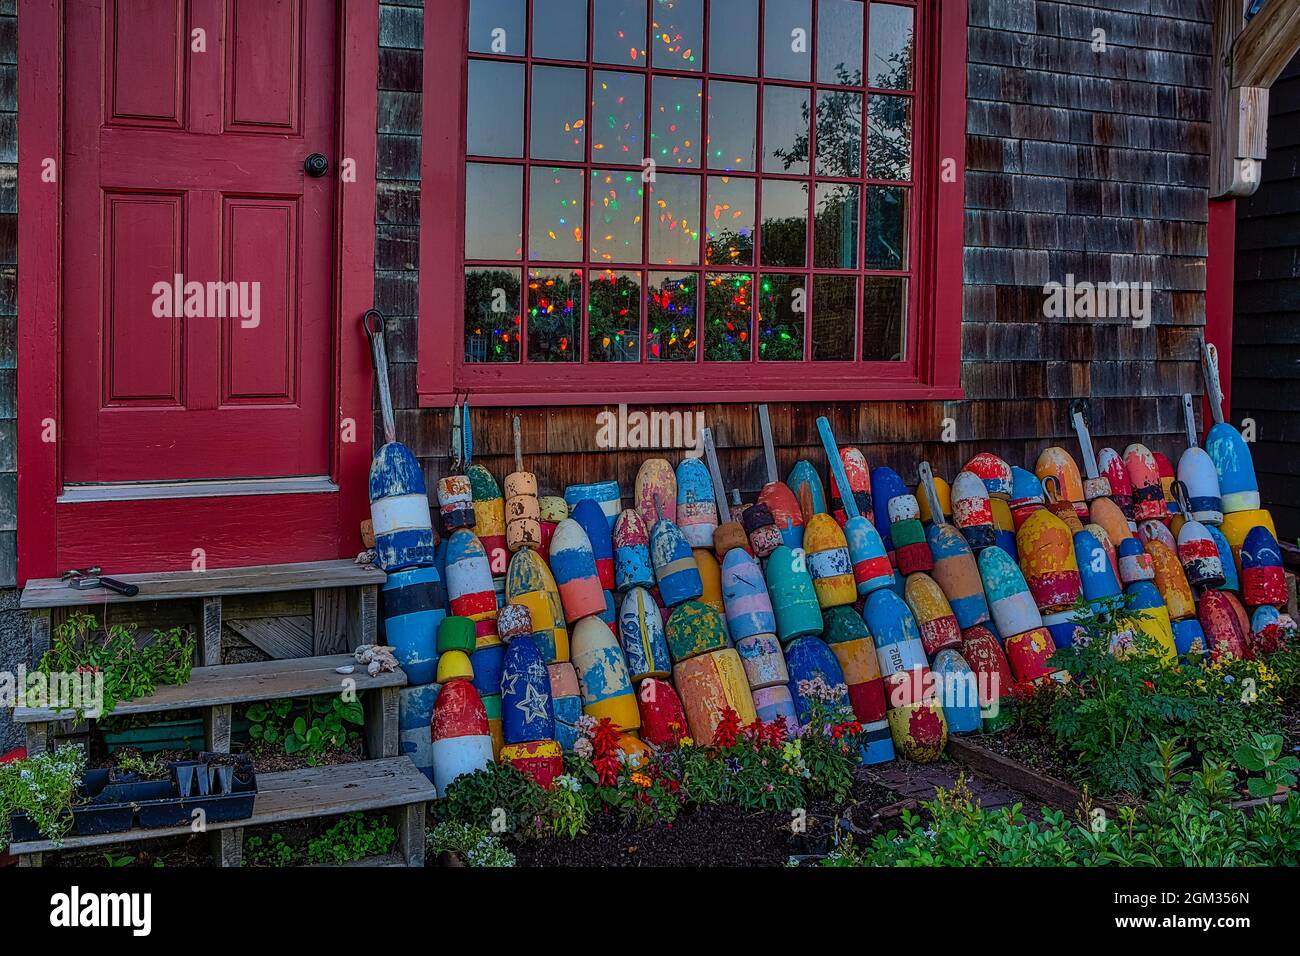 Christmas In Rockport ME - Rows of colorful buoys lined up in a storefront with Motif Number One with a lit up Christmas tree inside at Bradley Wharf Stock Photo